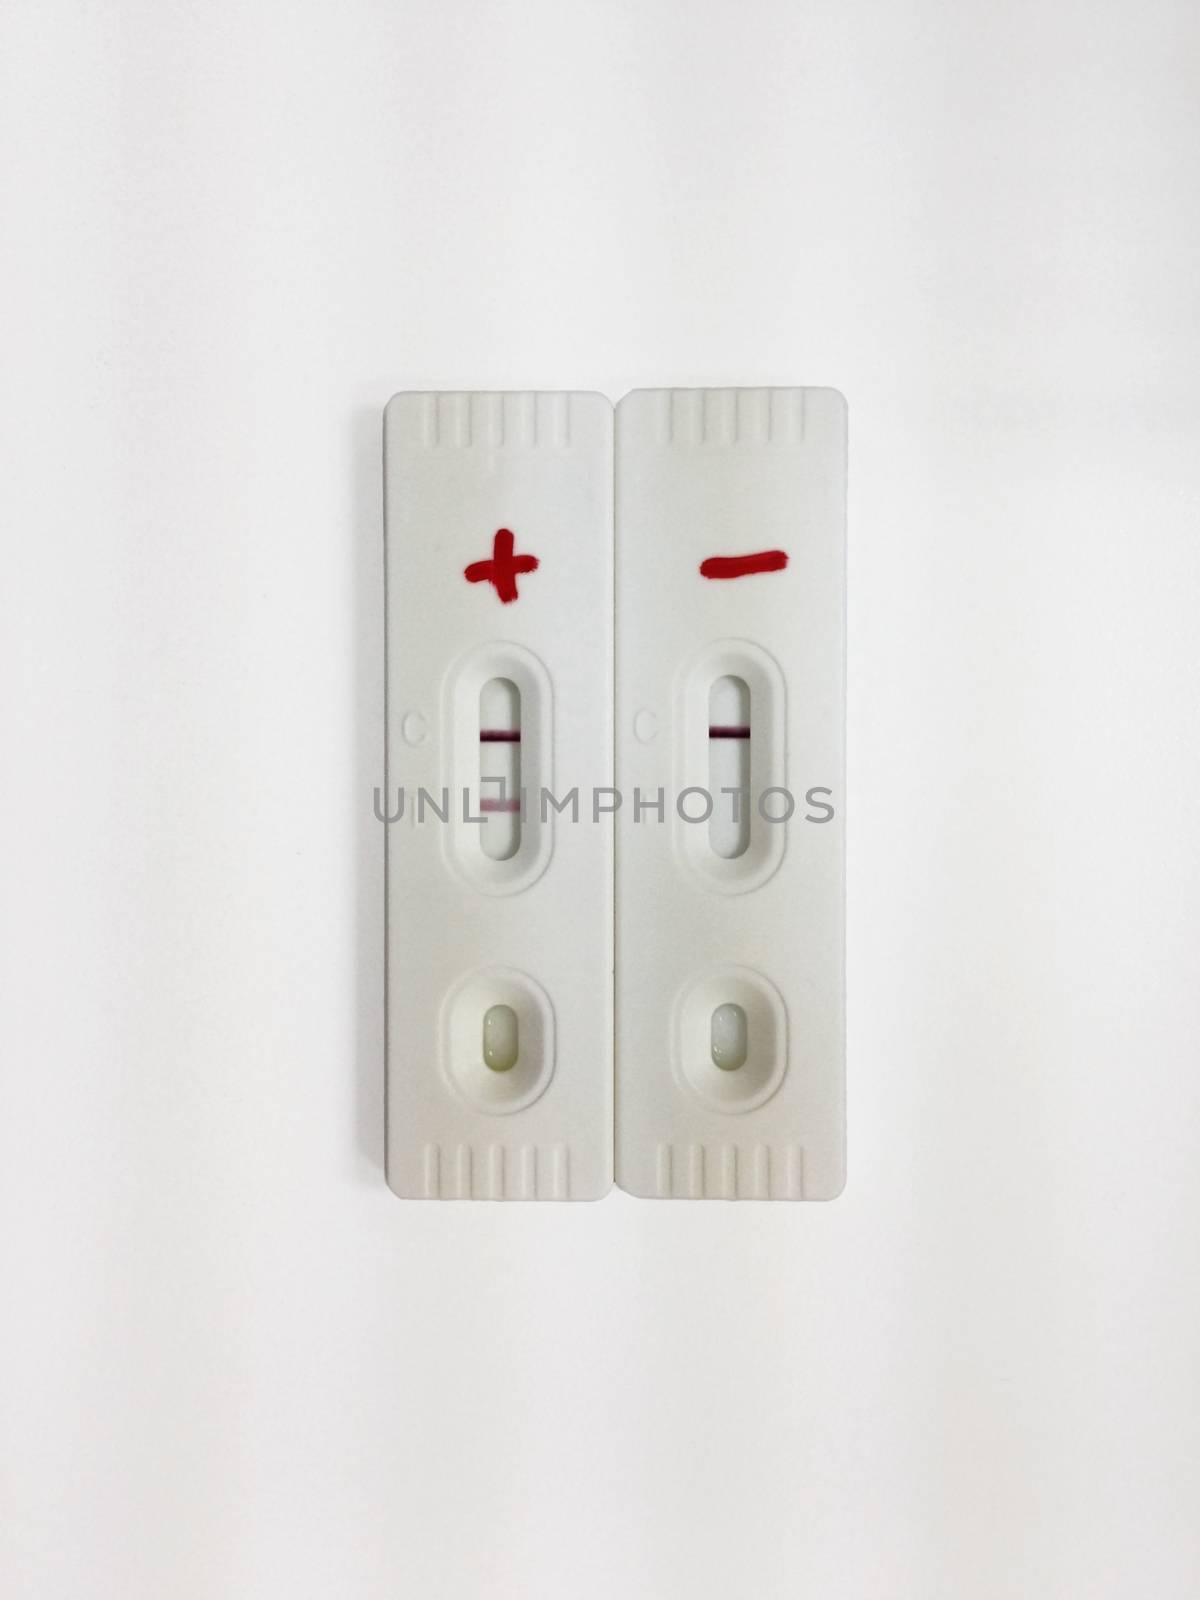 Positive and negative test cassette strips for analysis of HCG hormone in the urine